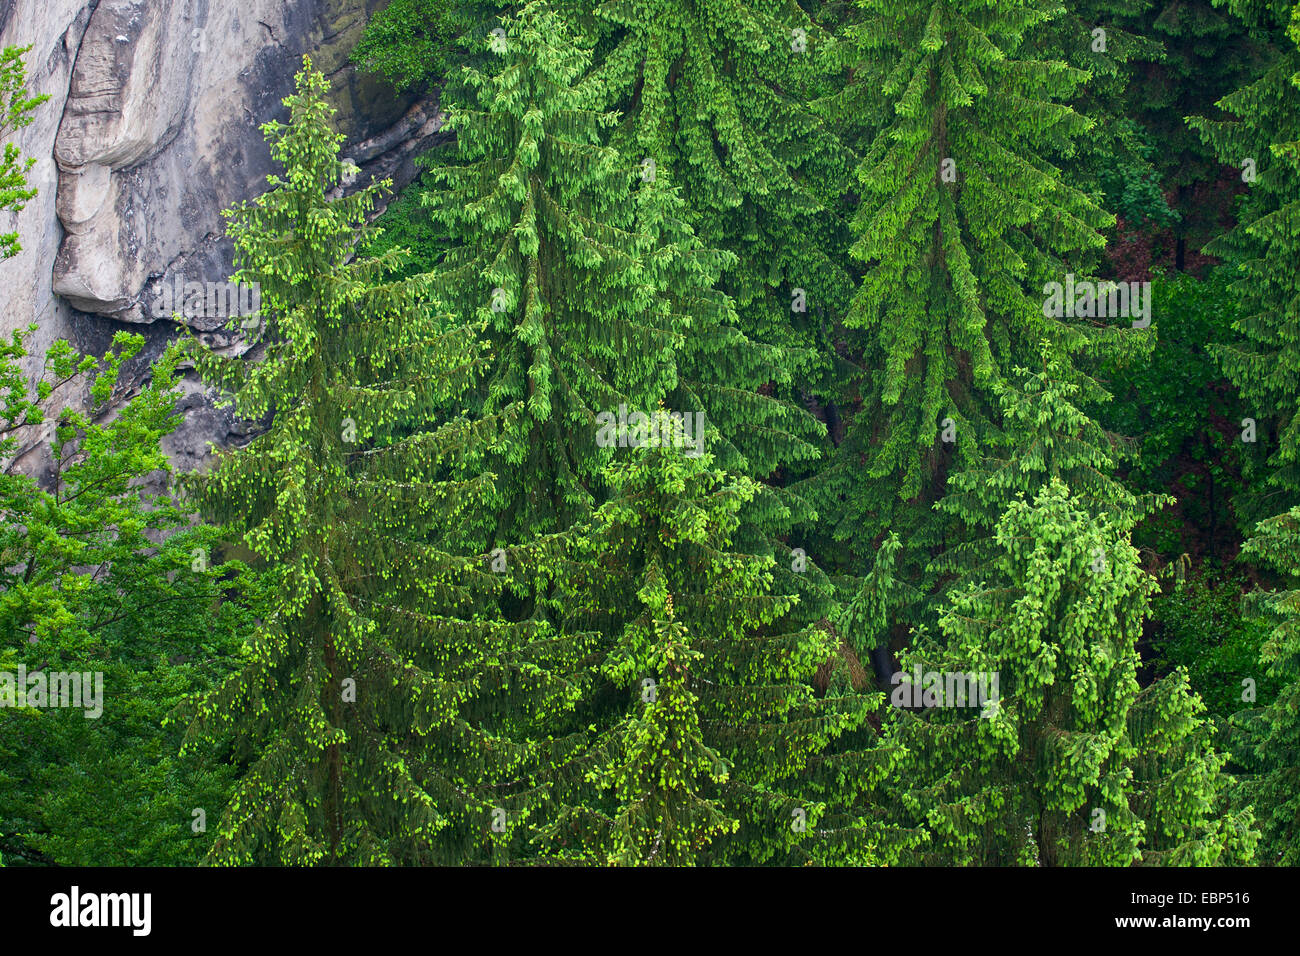 Norway spruce (Picea abies), Germany Stock Photo